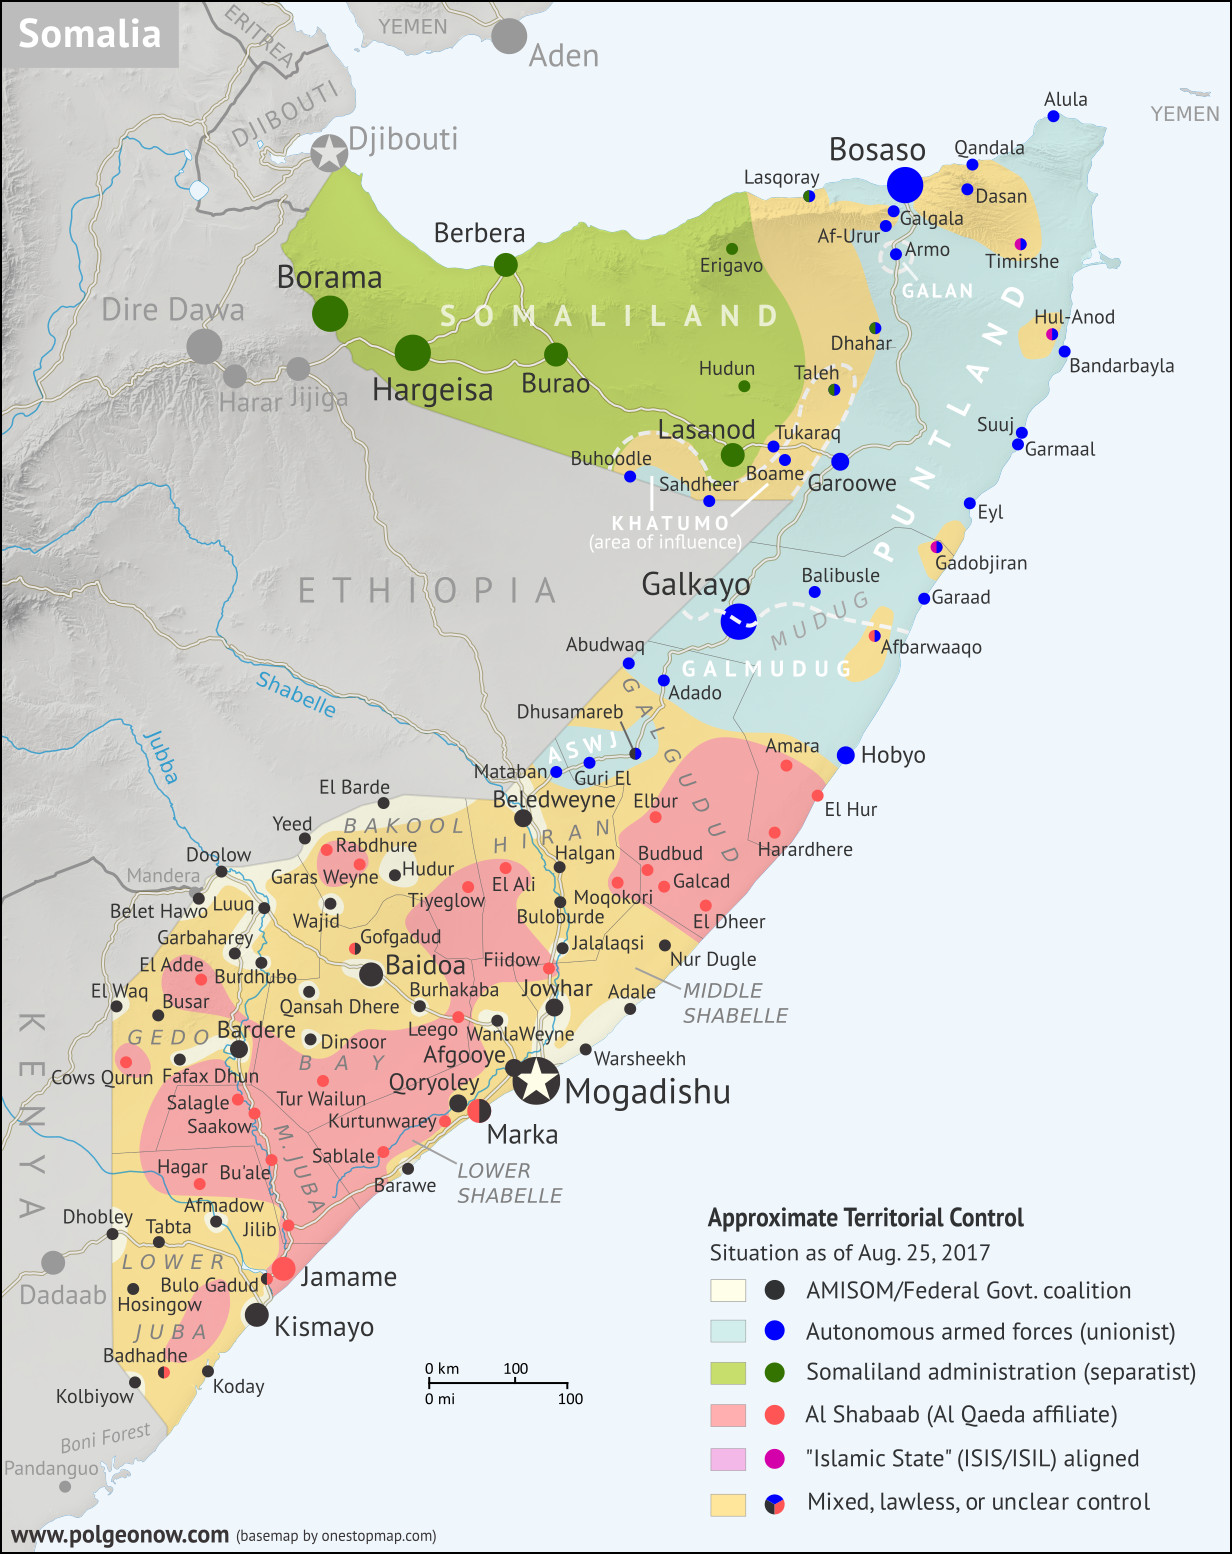 Somalia Control Map And Timeline August 2017 Political Geography Now